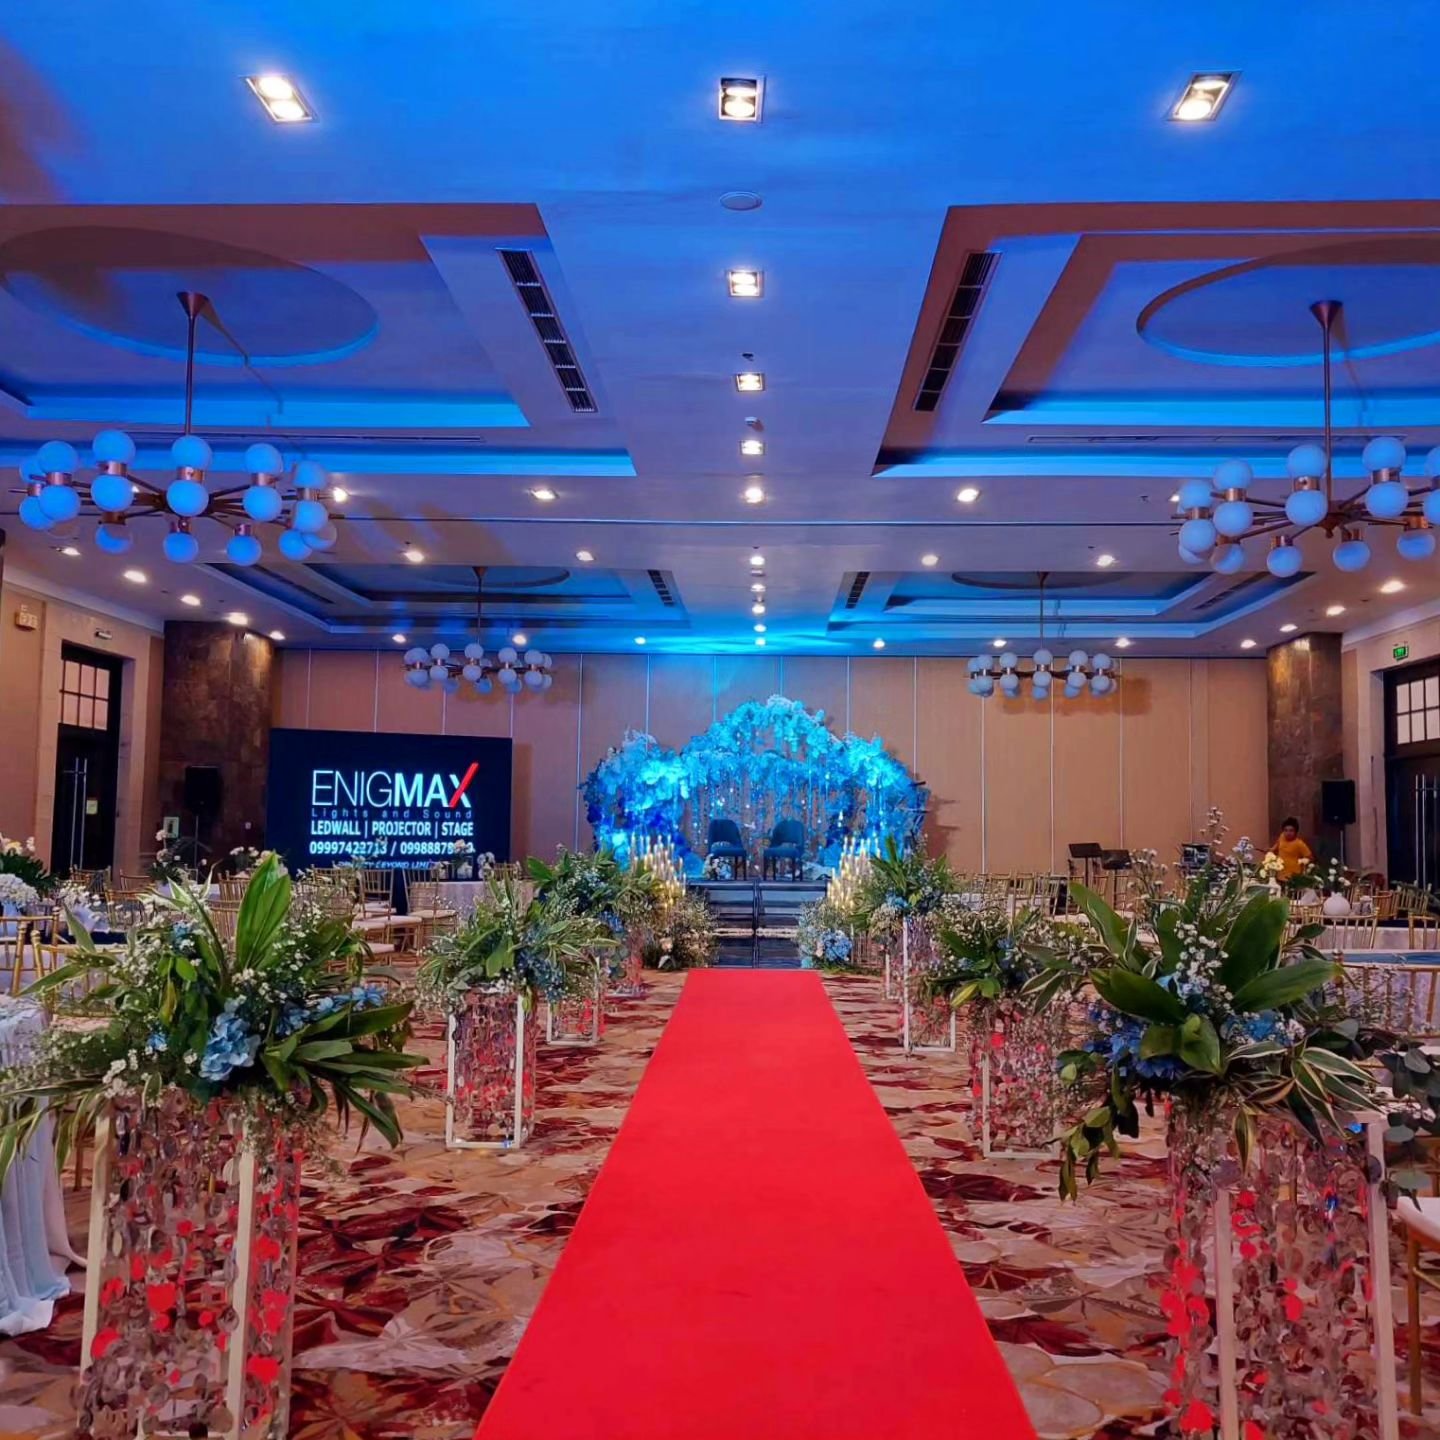 ALL SET
SUMMIT RIDGE TAGAYTAY 
9X12 LEDWALL 
LIGHTS AND SOUND 

Powered by: Enigmax Lights And Sounds Services